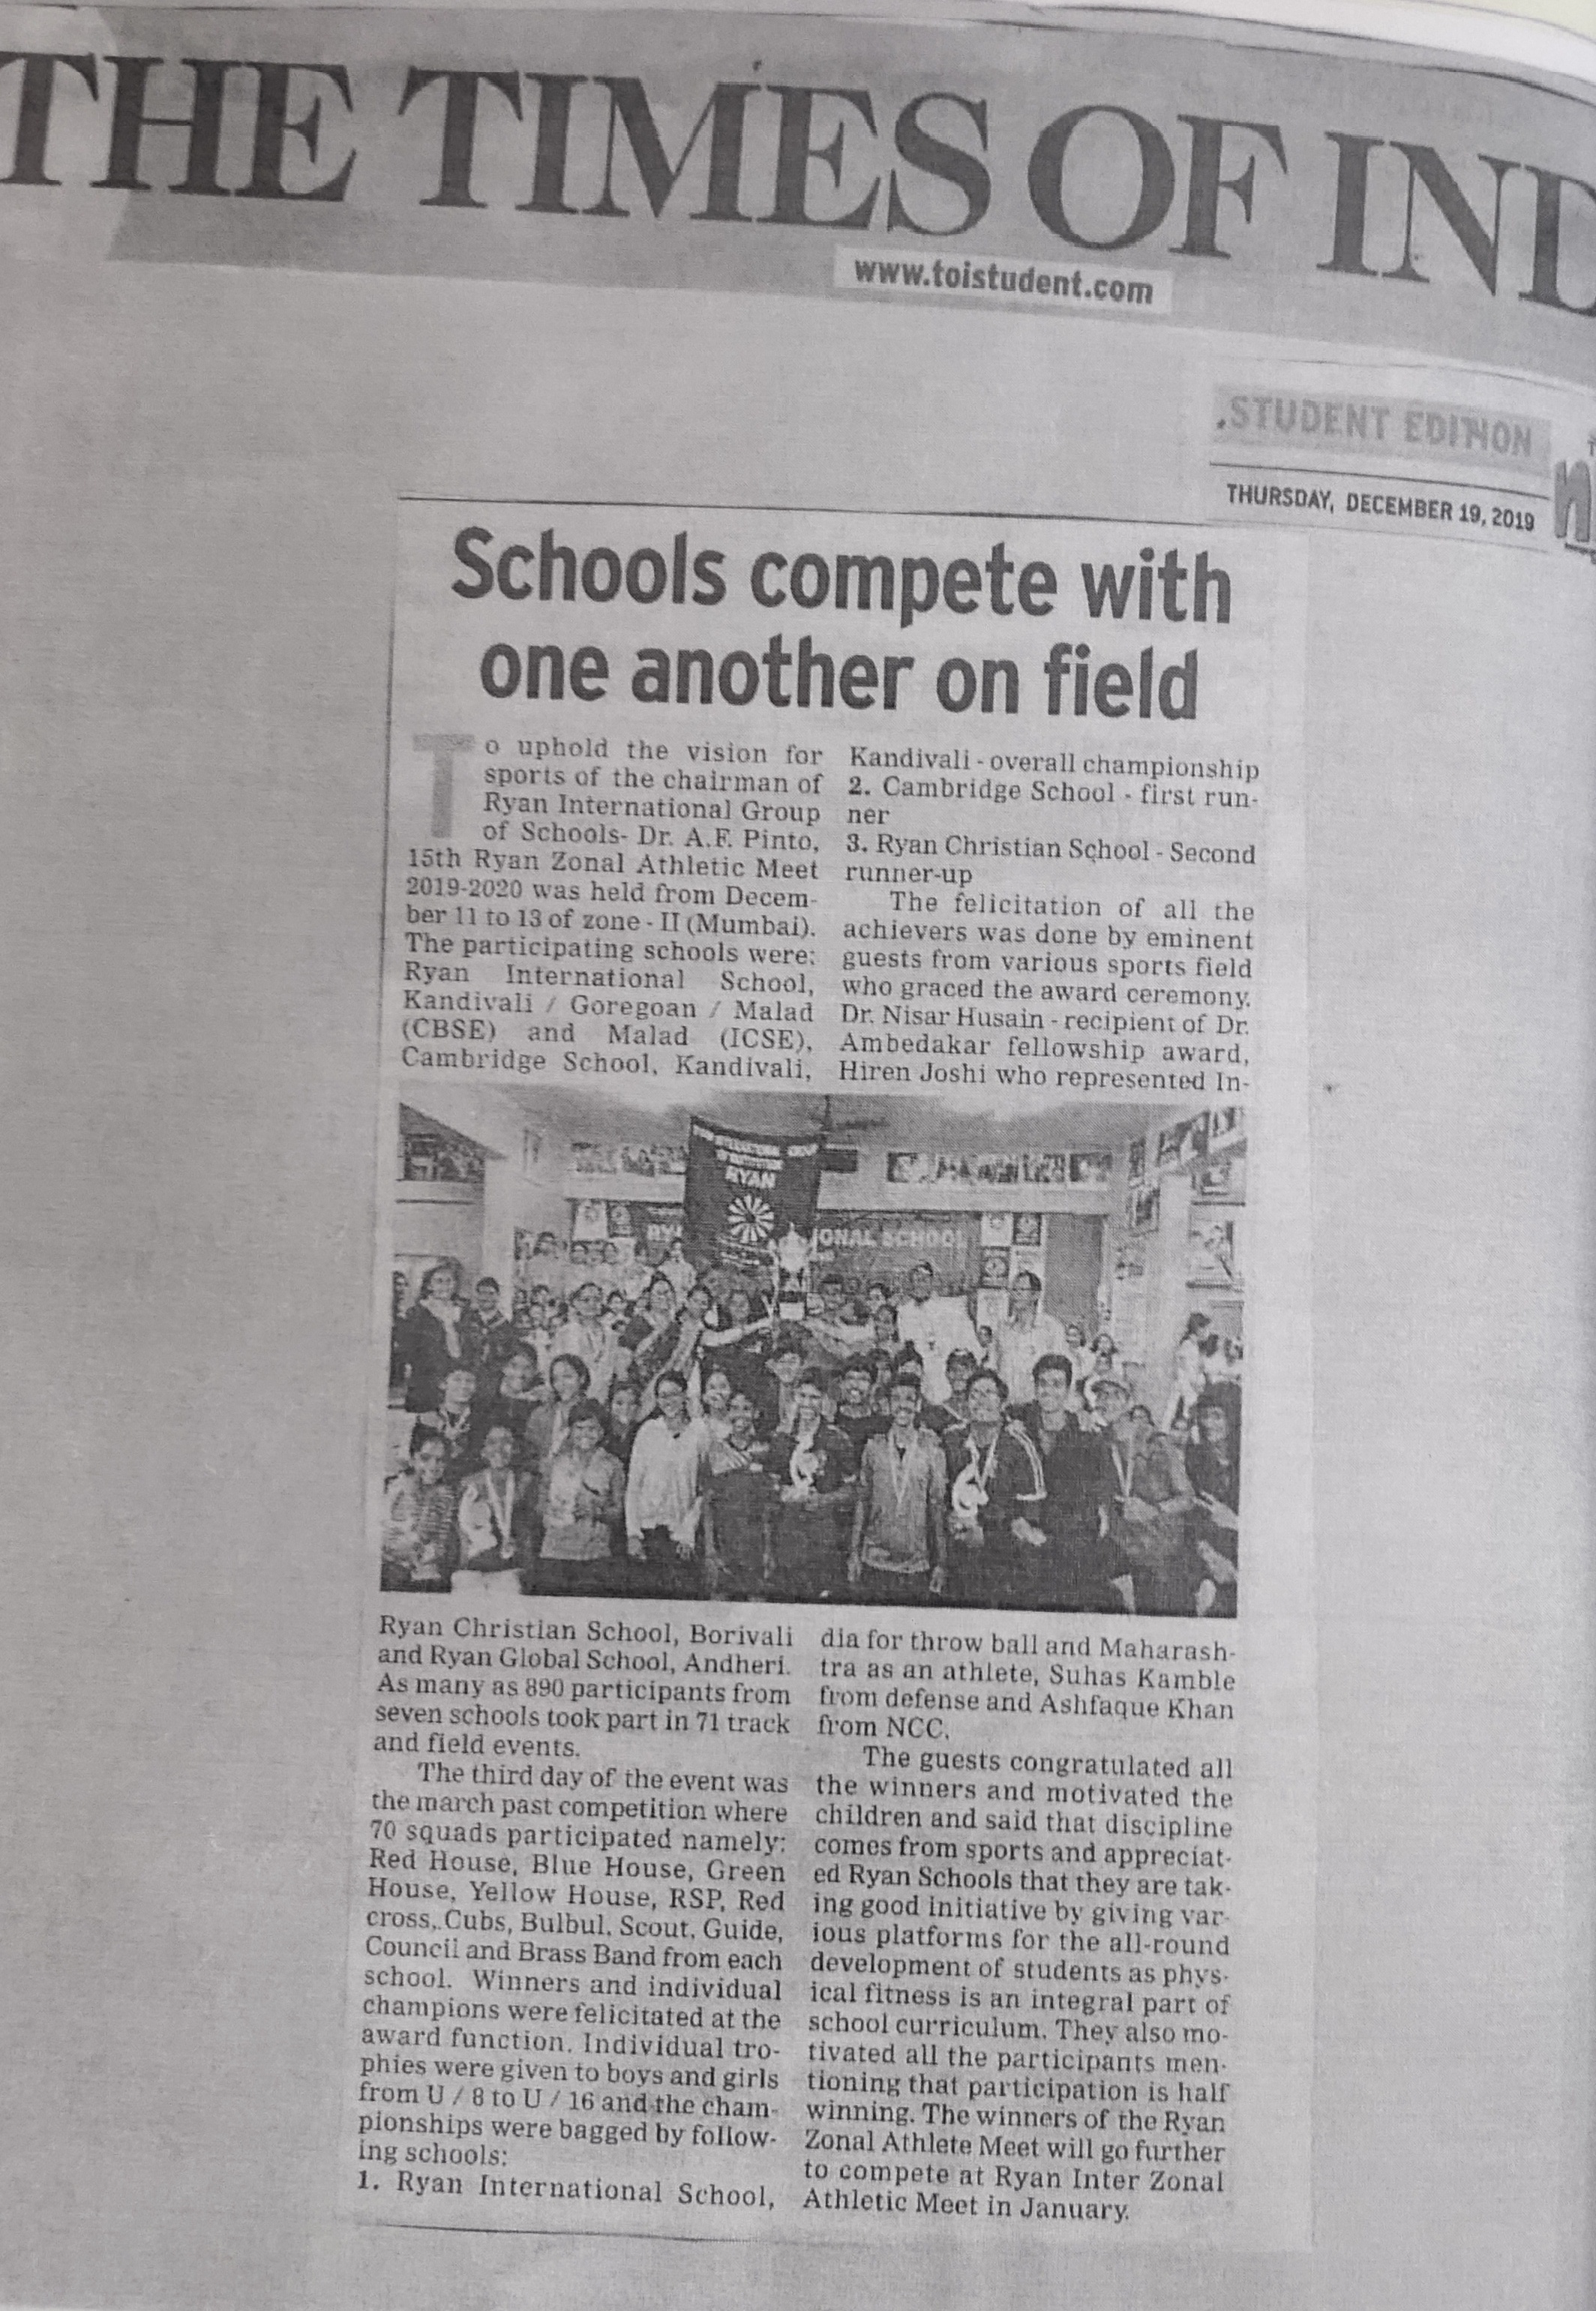 An article under the name “15th Ryan Zonal Meet” was published in the Times of India